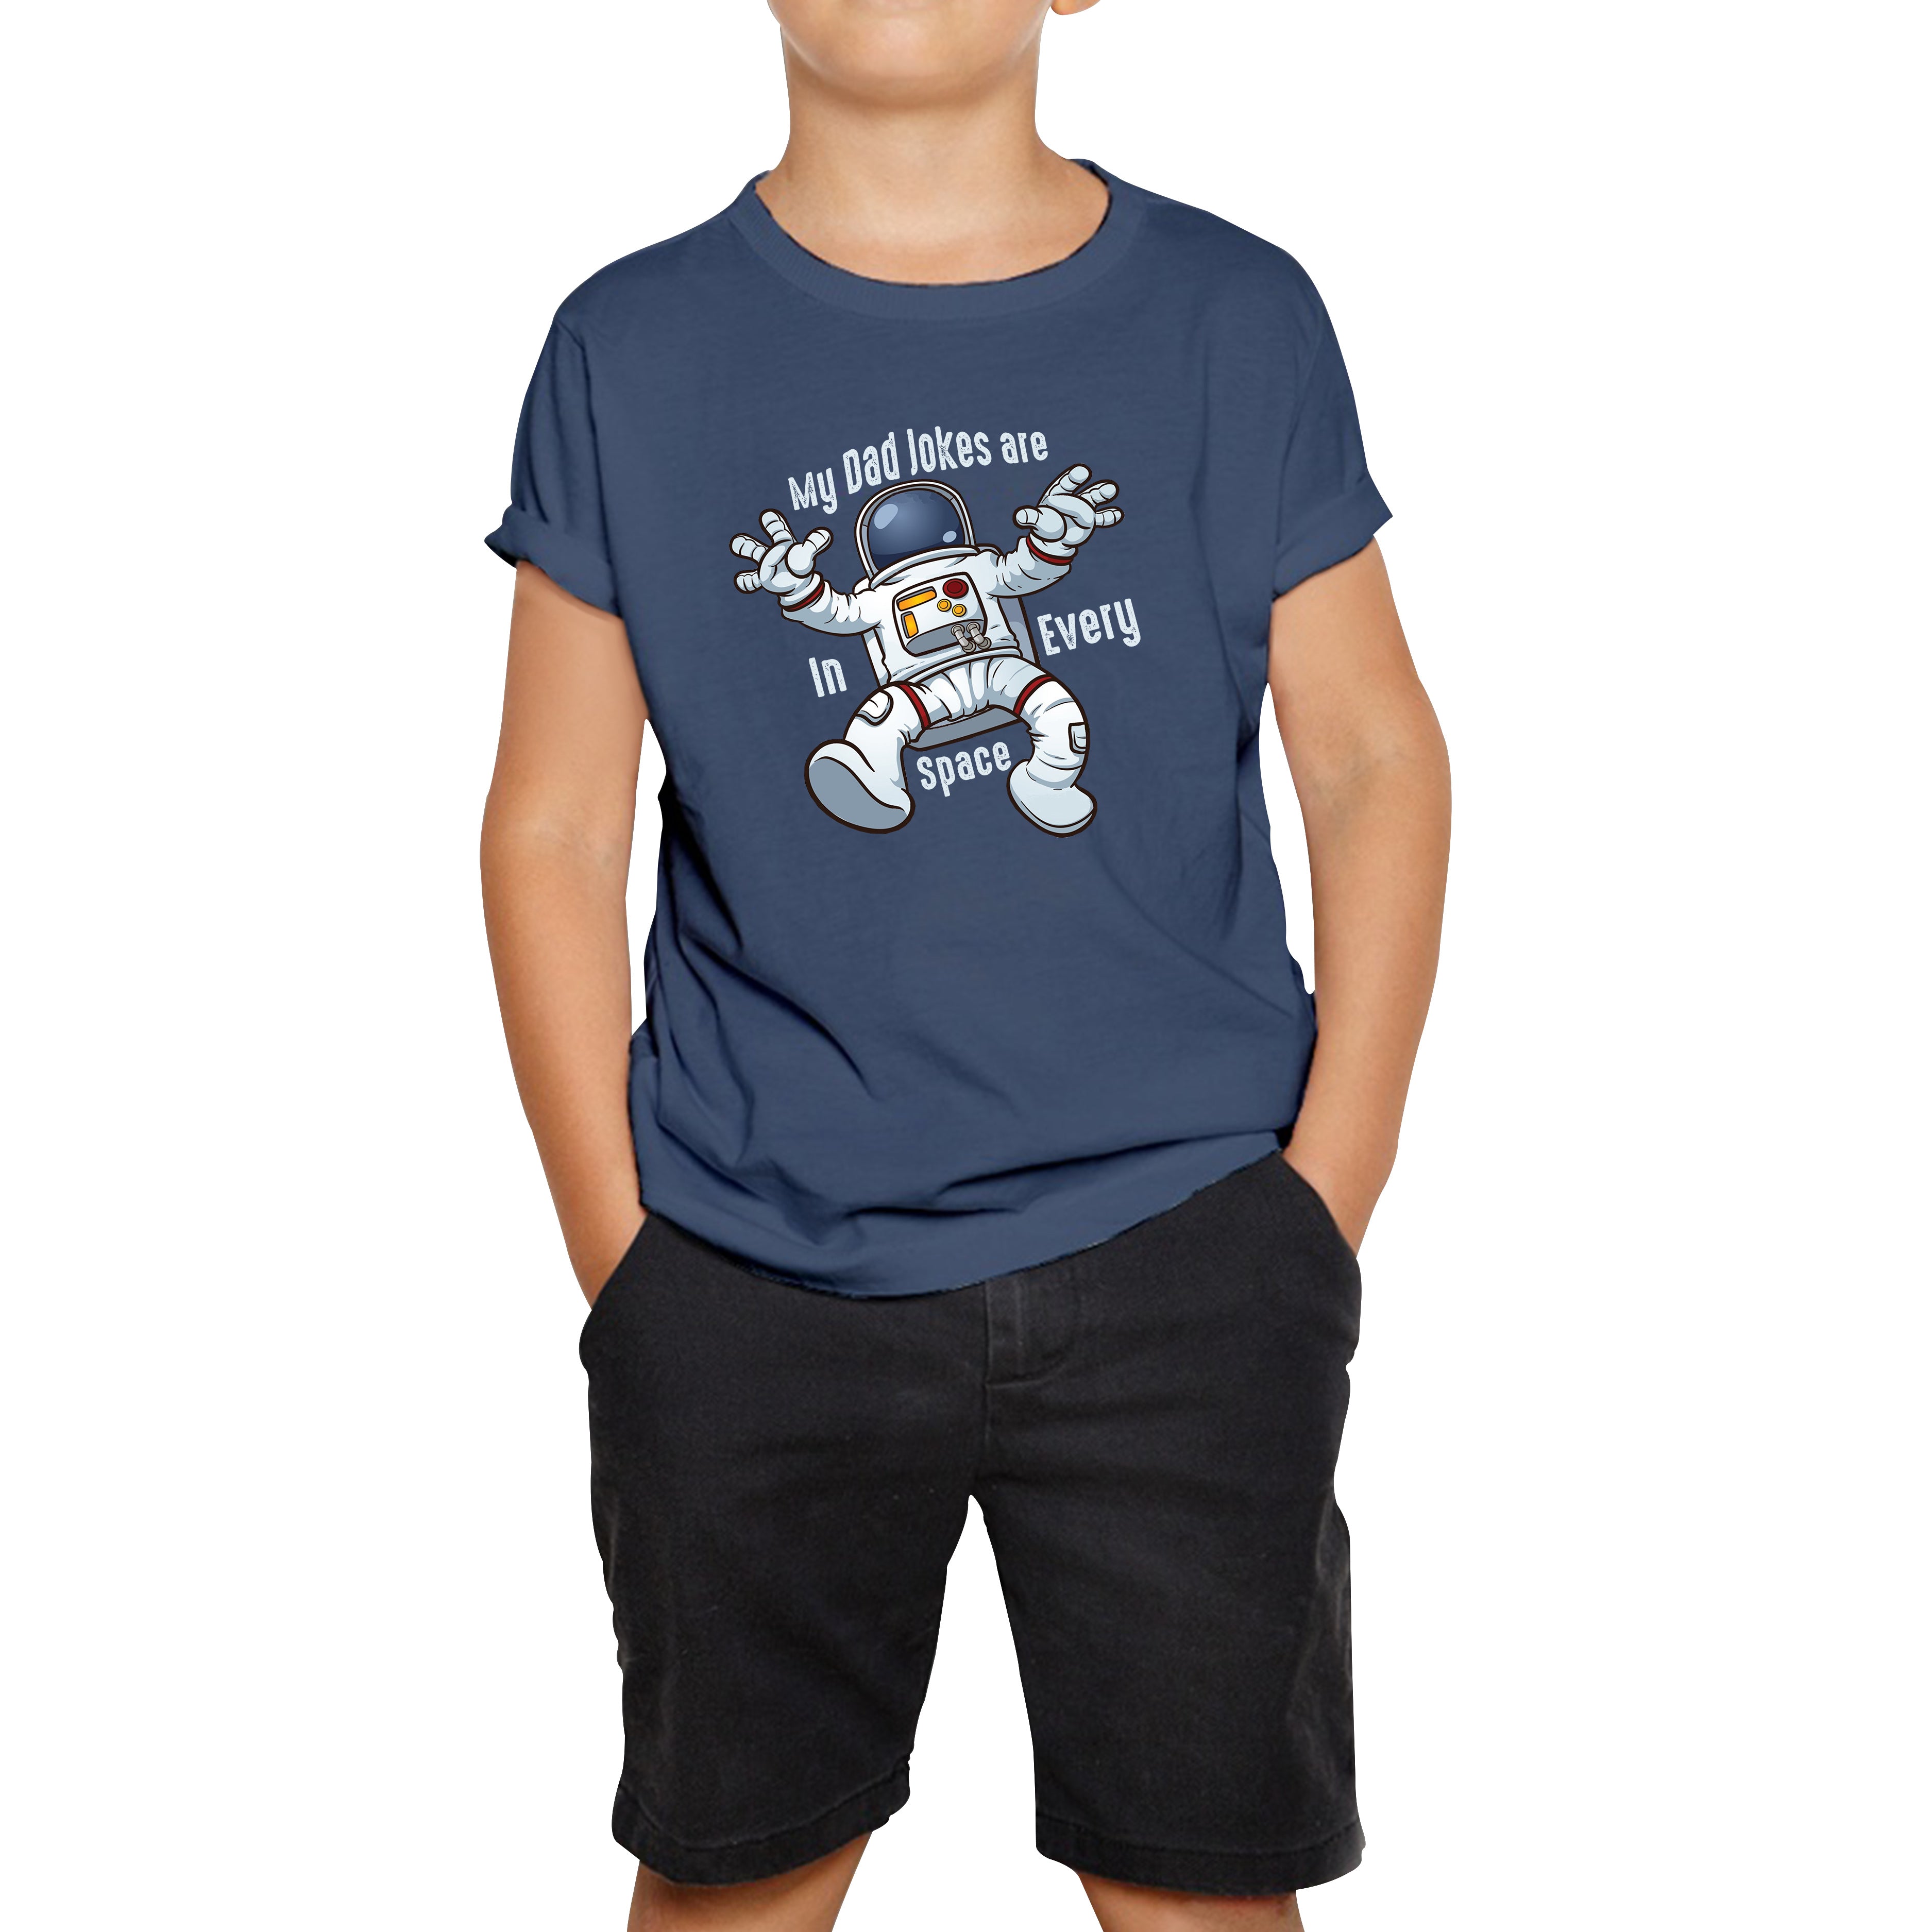 My Dad Jokes Are In Every Space - Falling Astronaut Funny Sarcastic Joke Meme Gift For Father Scientific Meme Joke Space Kids Tee